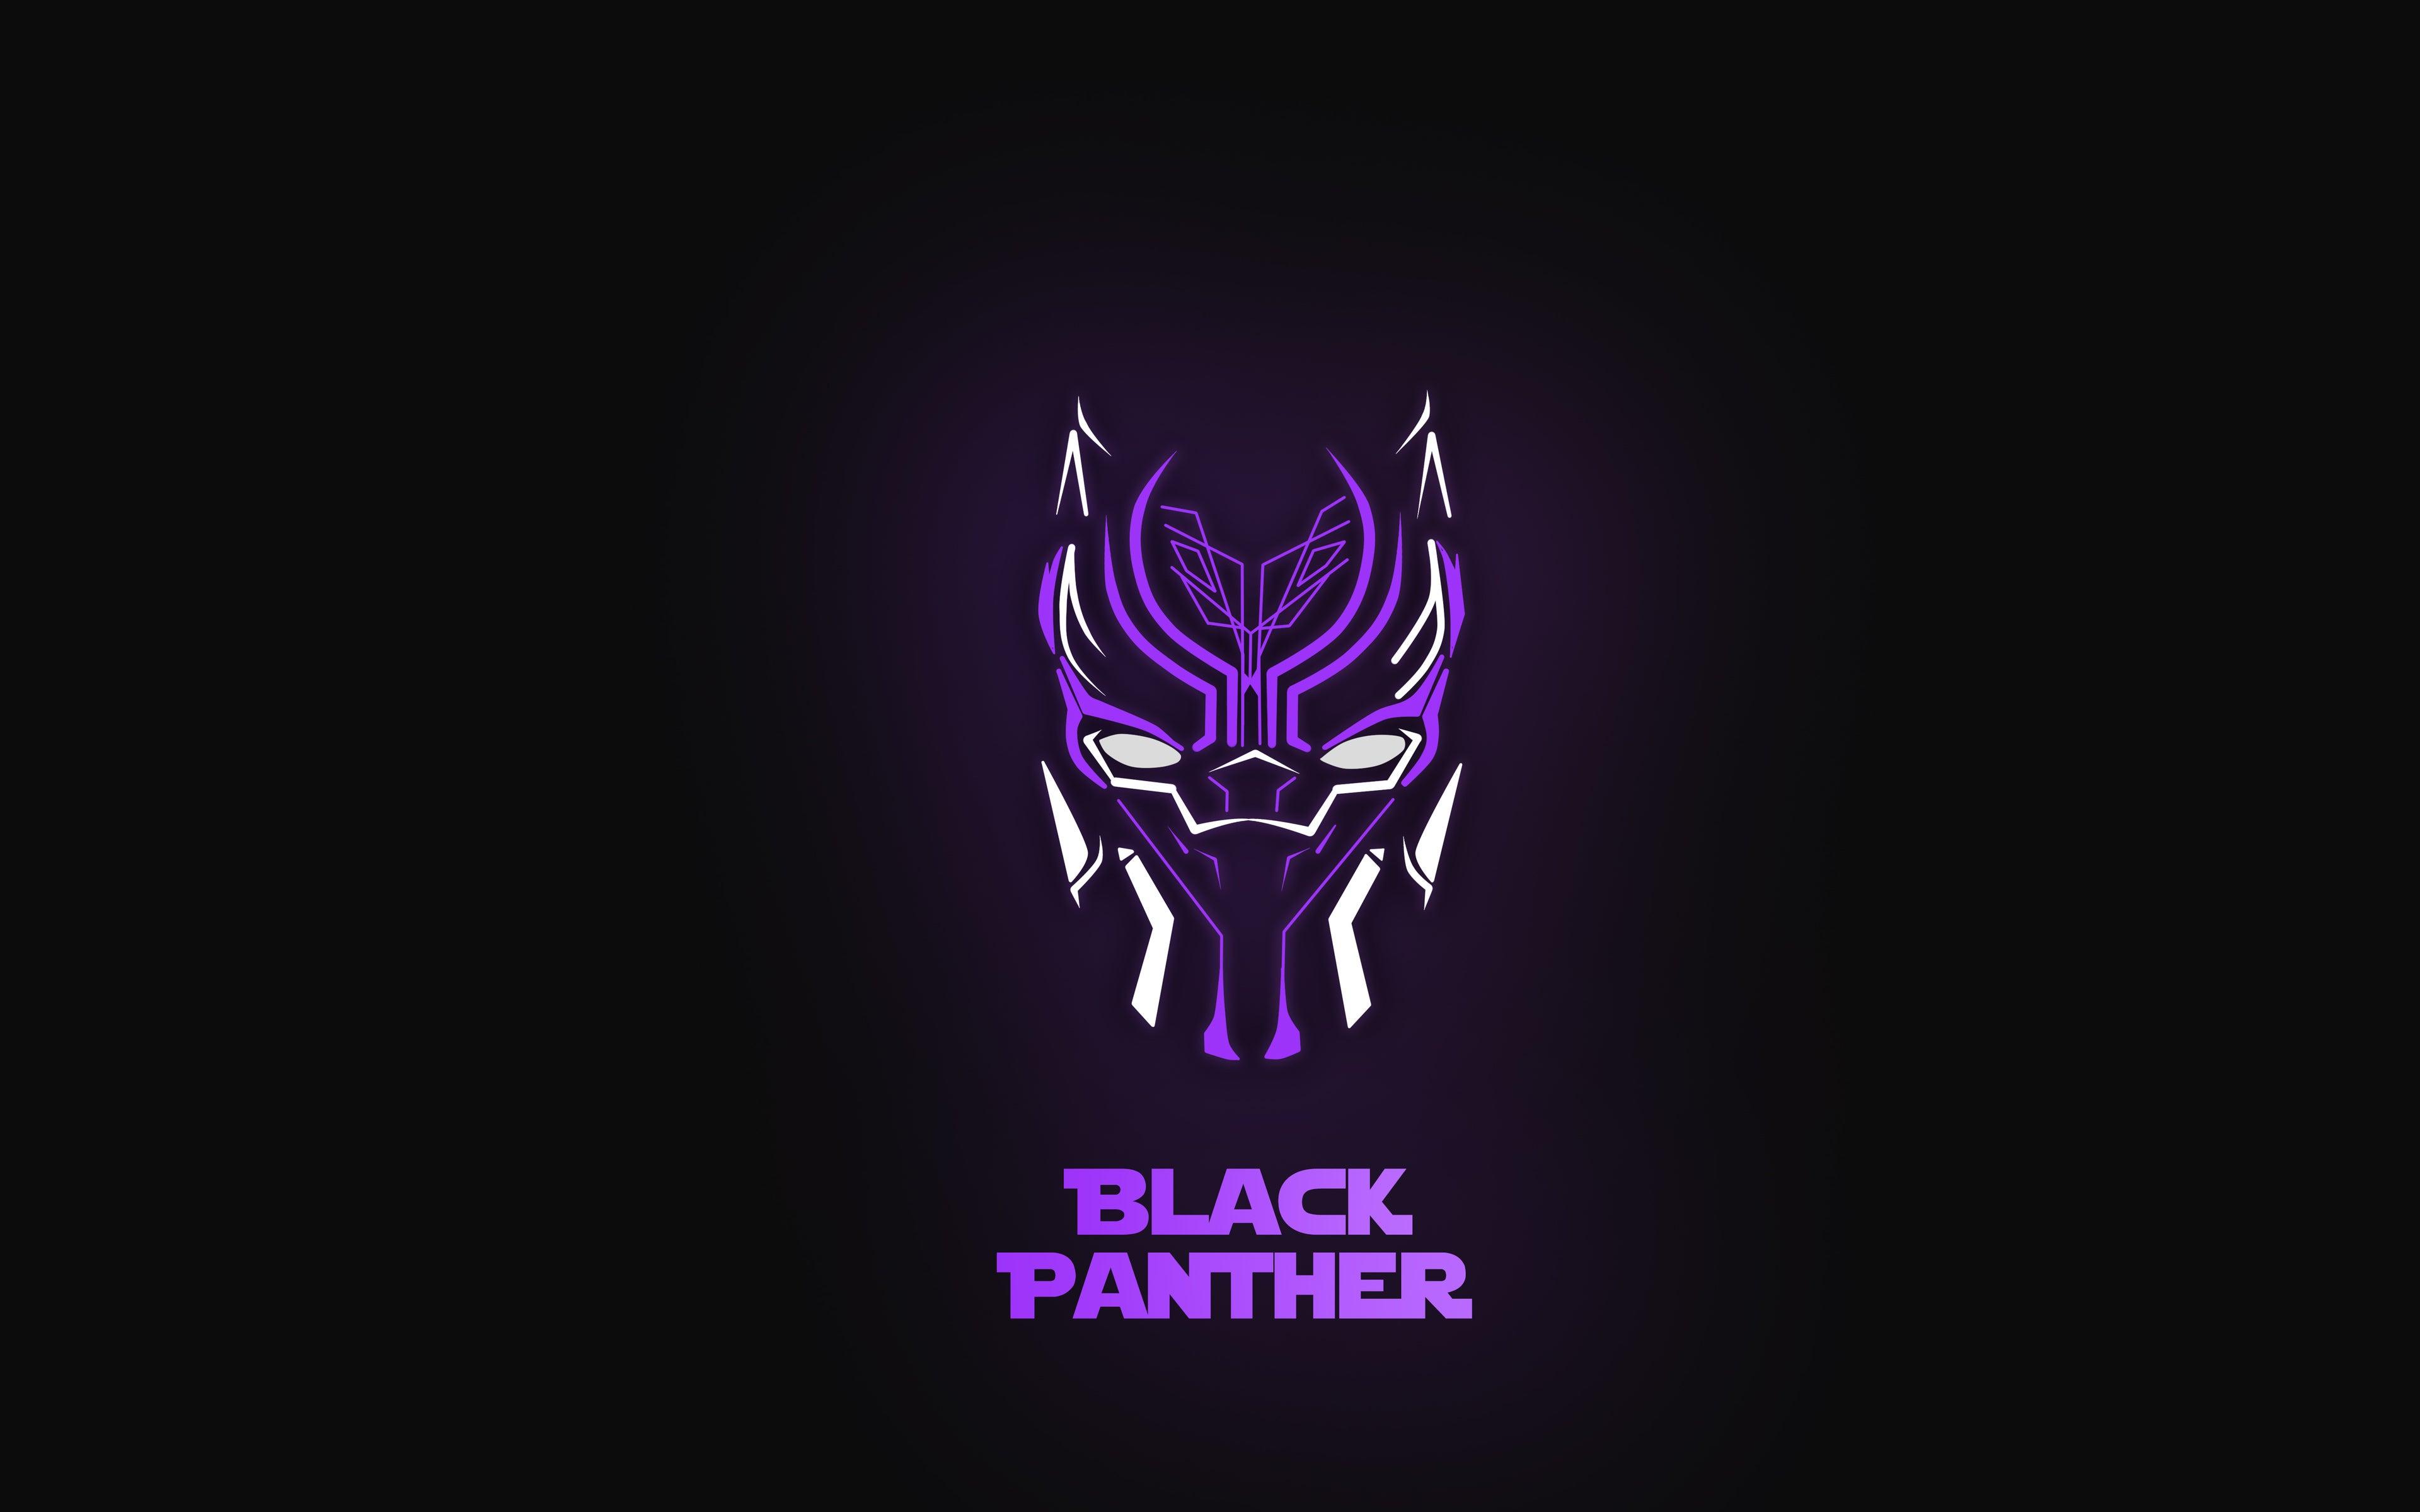 Panther 4K wallpaper for your desktop or mobile screen free